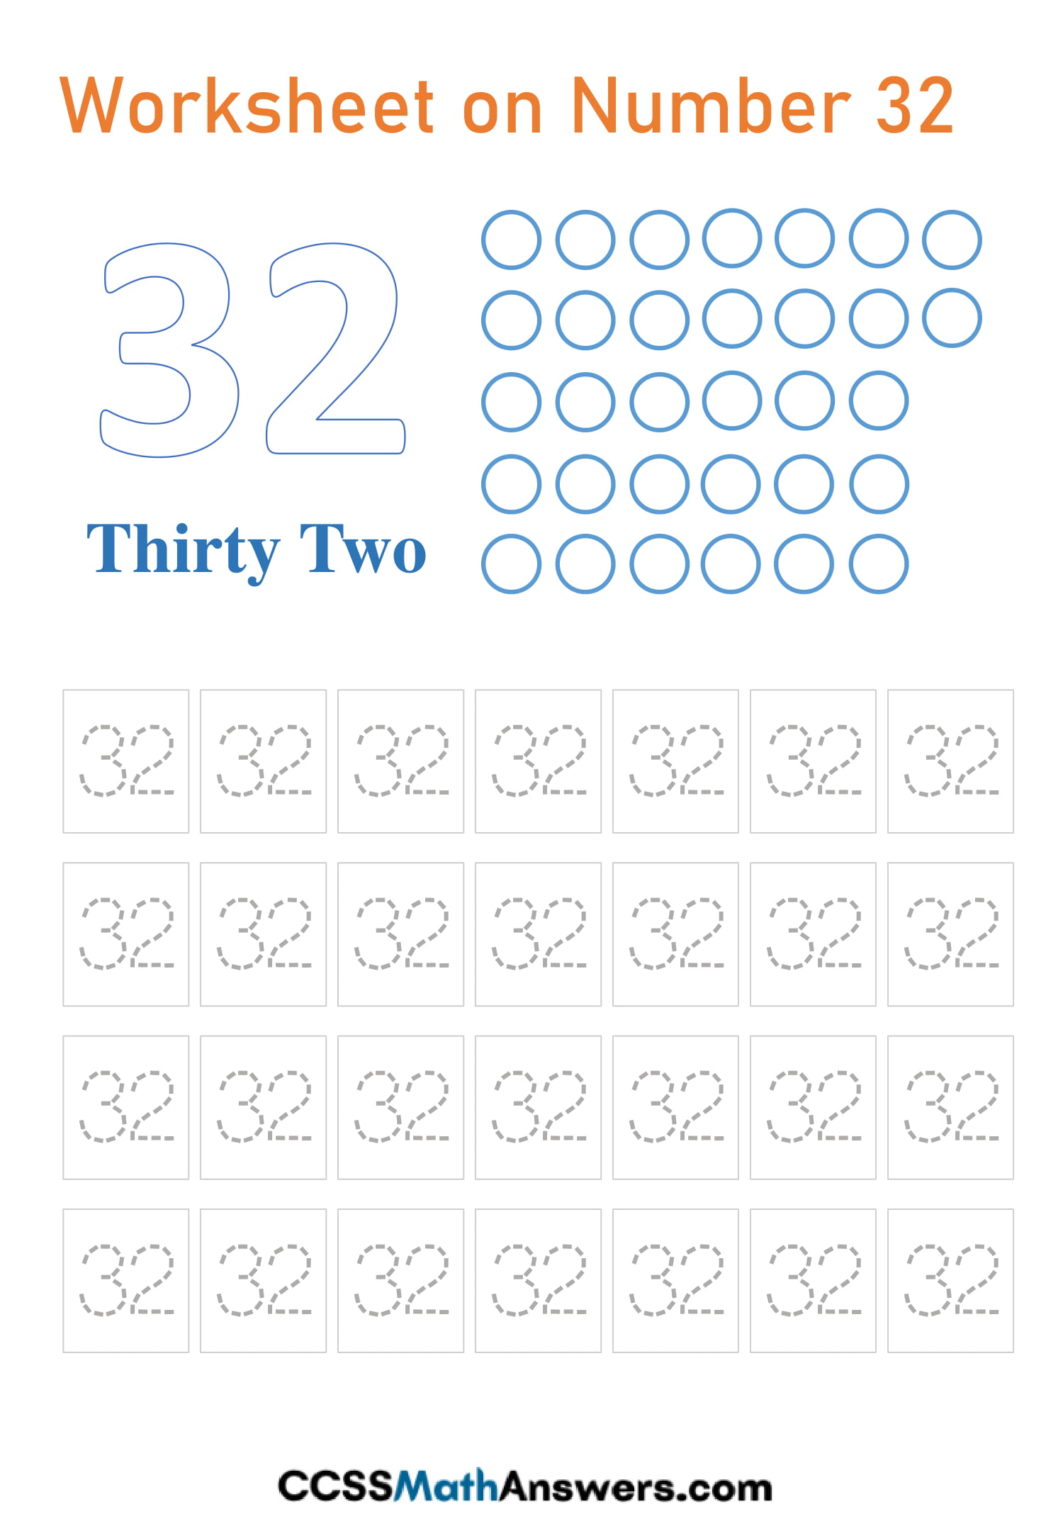 worksheet-on-number-32-number-32-tracing-counting-identification-activities-for-kindergarten